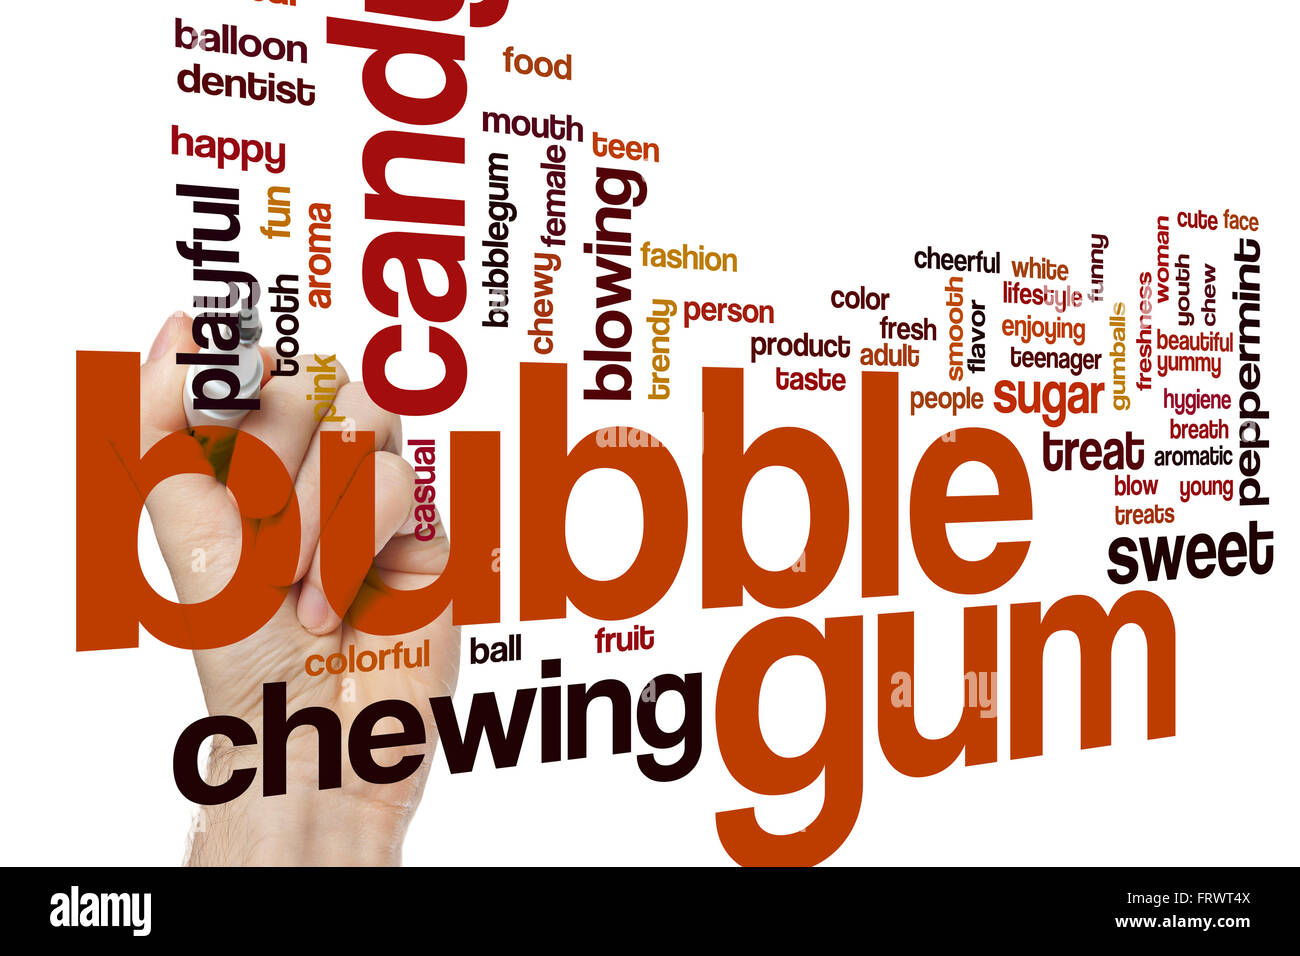 Bubble gum word cloud concept with candy chewing related tags Stock Photo